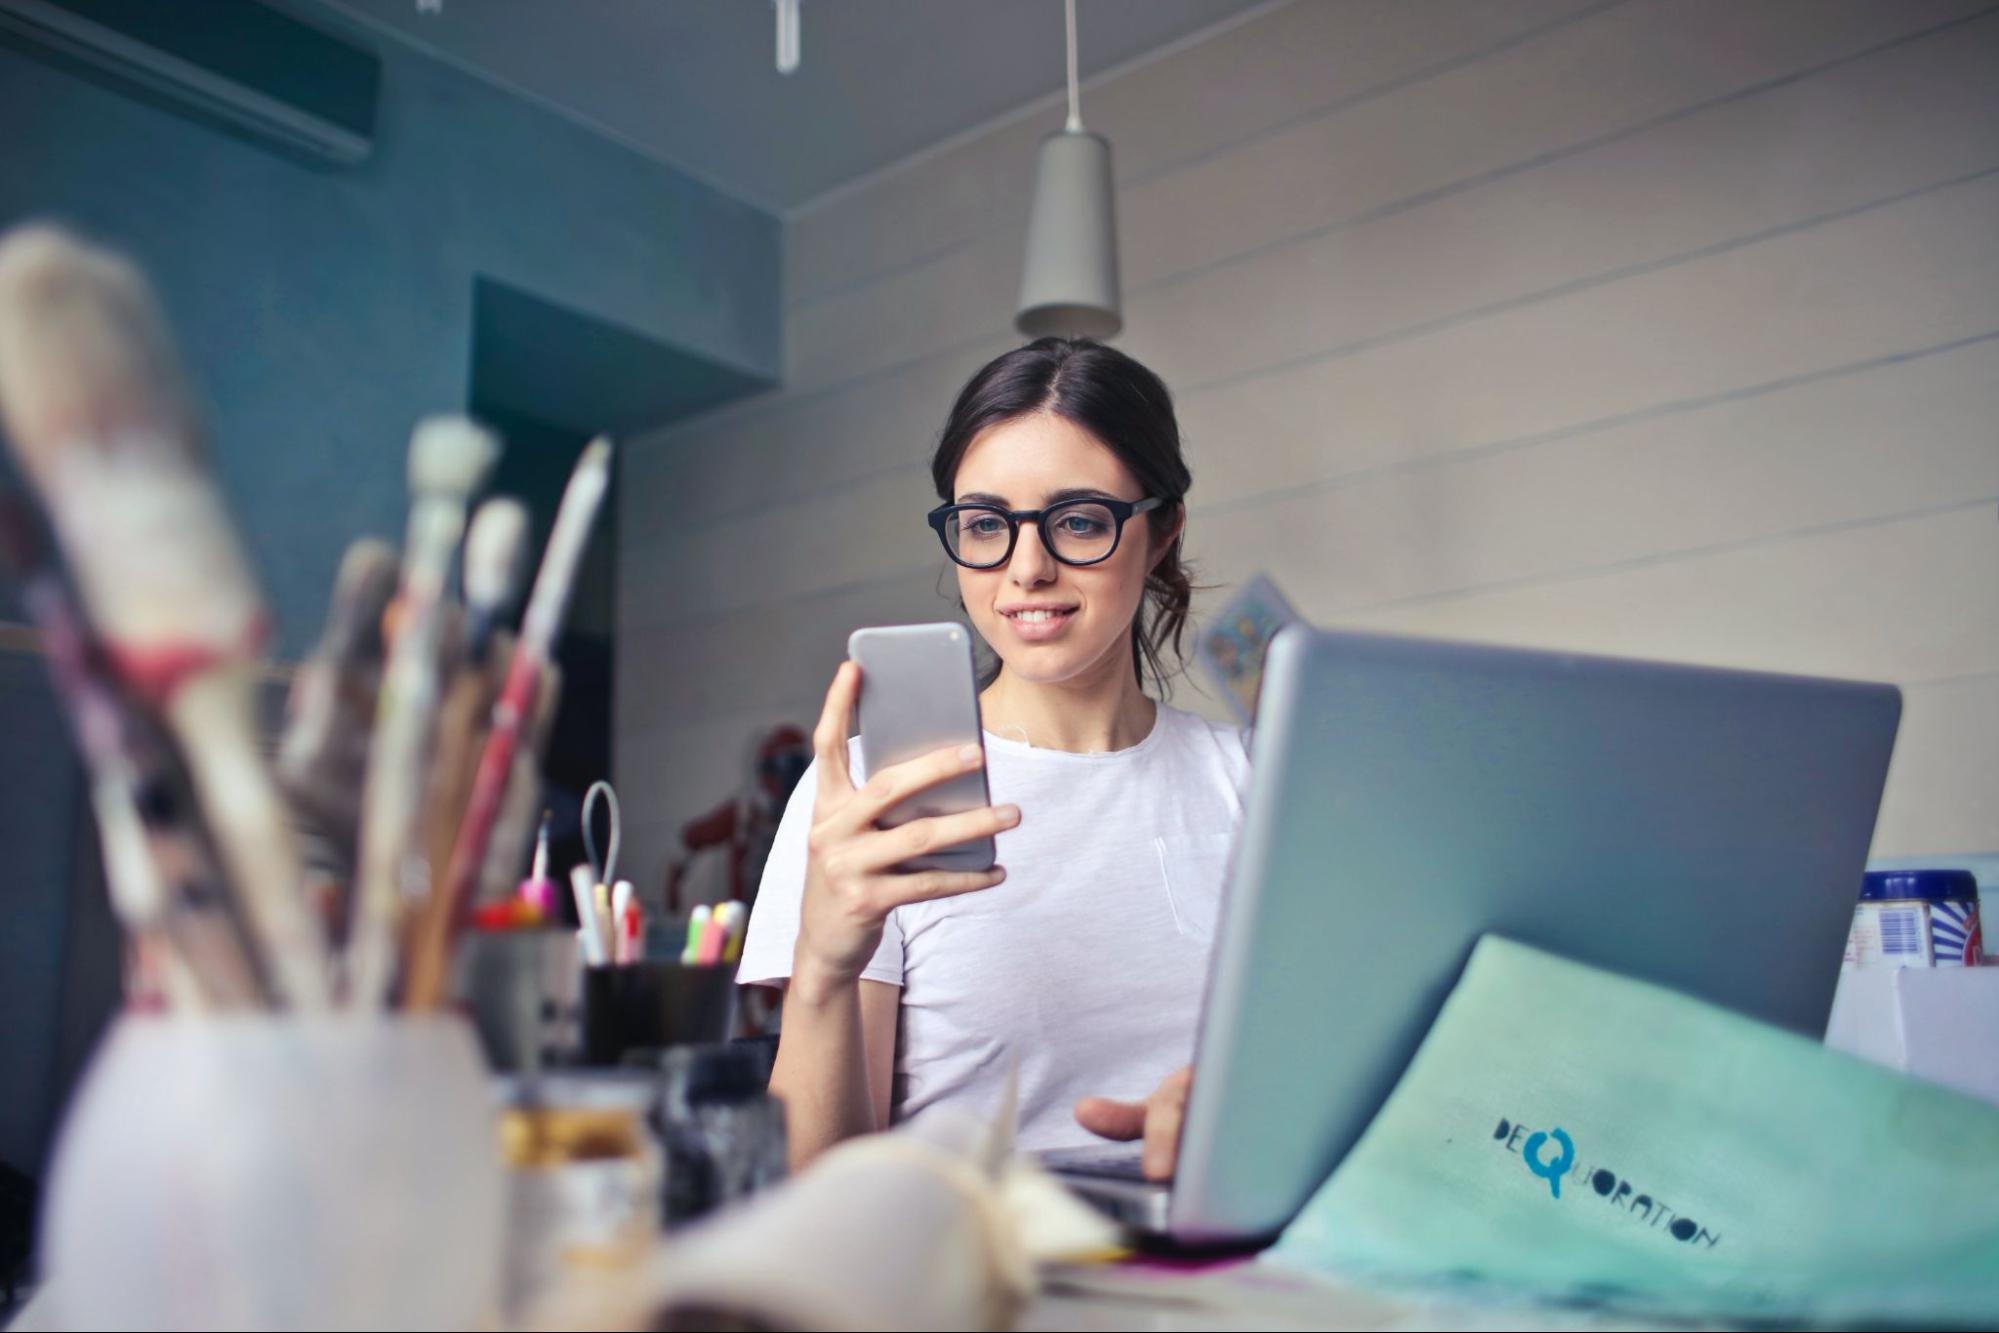 Woman in white shirt and eyeglasses using phone at desk with laptop and art materials